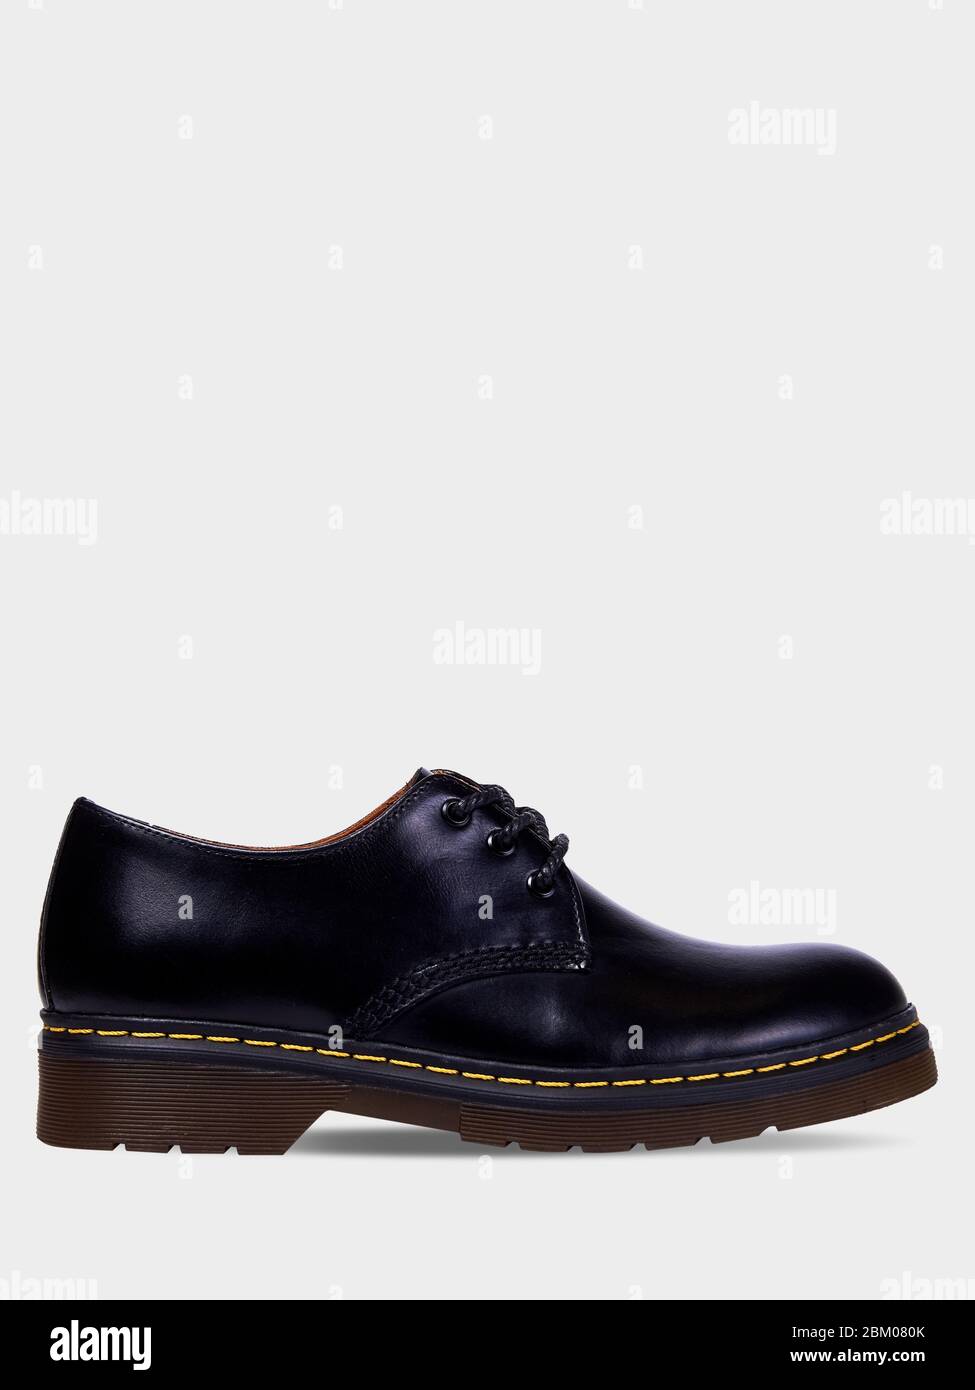 womens black rubber soled shoes